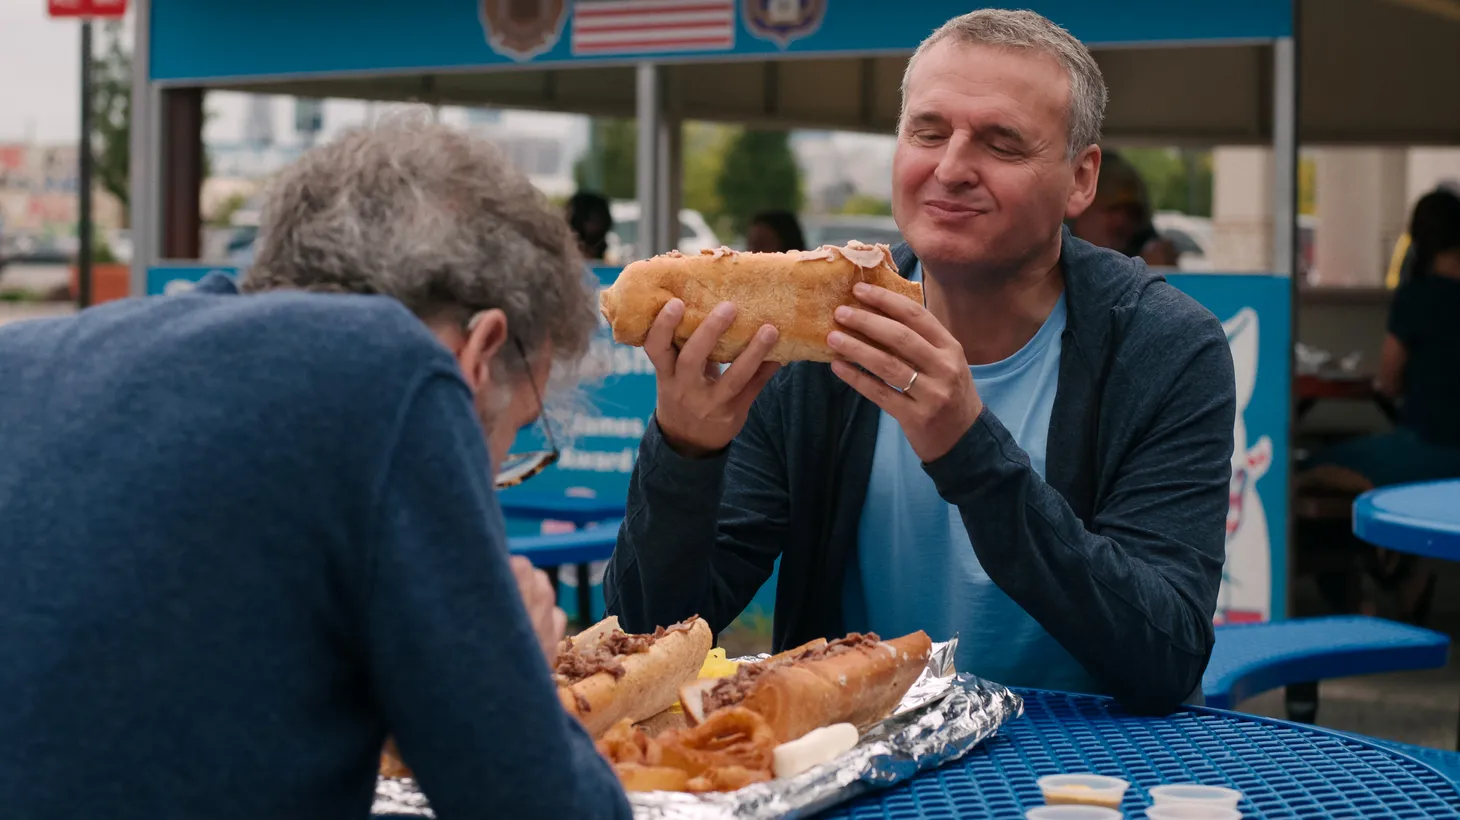 Phil Rosenthal makes a stop in Philadelphia for hoagies in the latest season of “Somebody Feed Phil.”